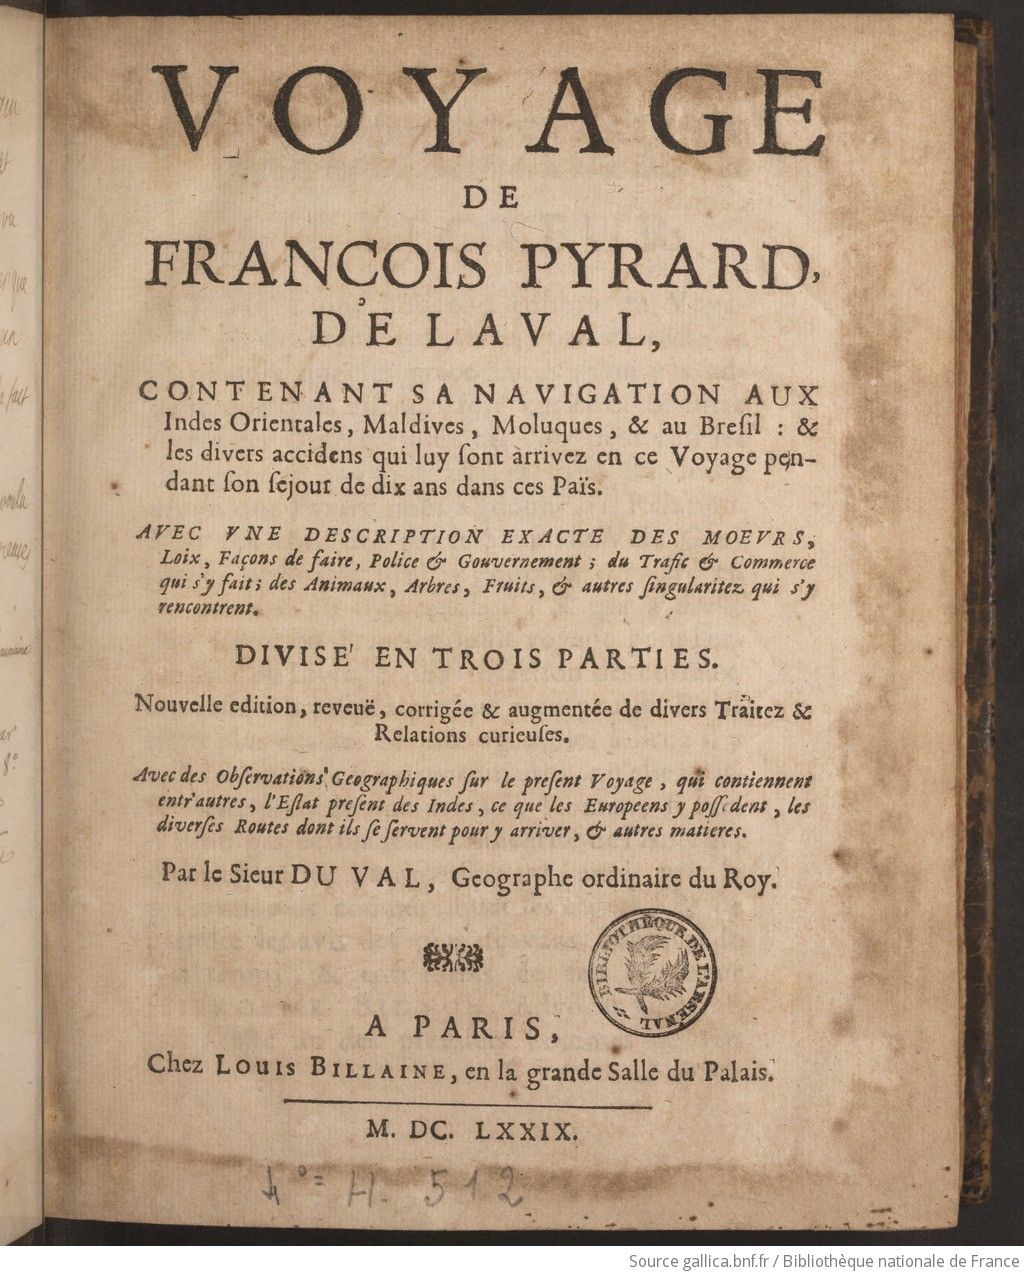 Early French Endeavours in Global Asia and the Creation of the Compagnie des Indes Orientales (1664)